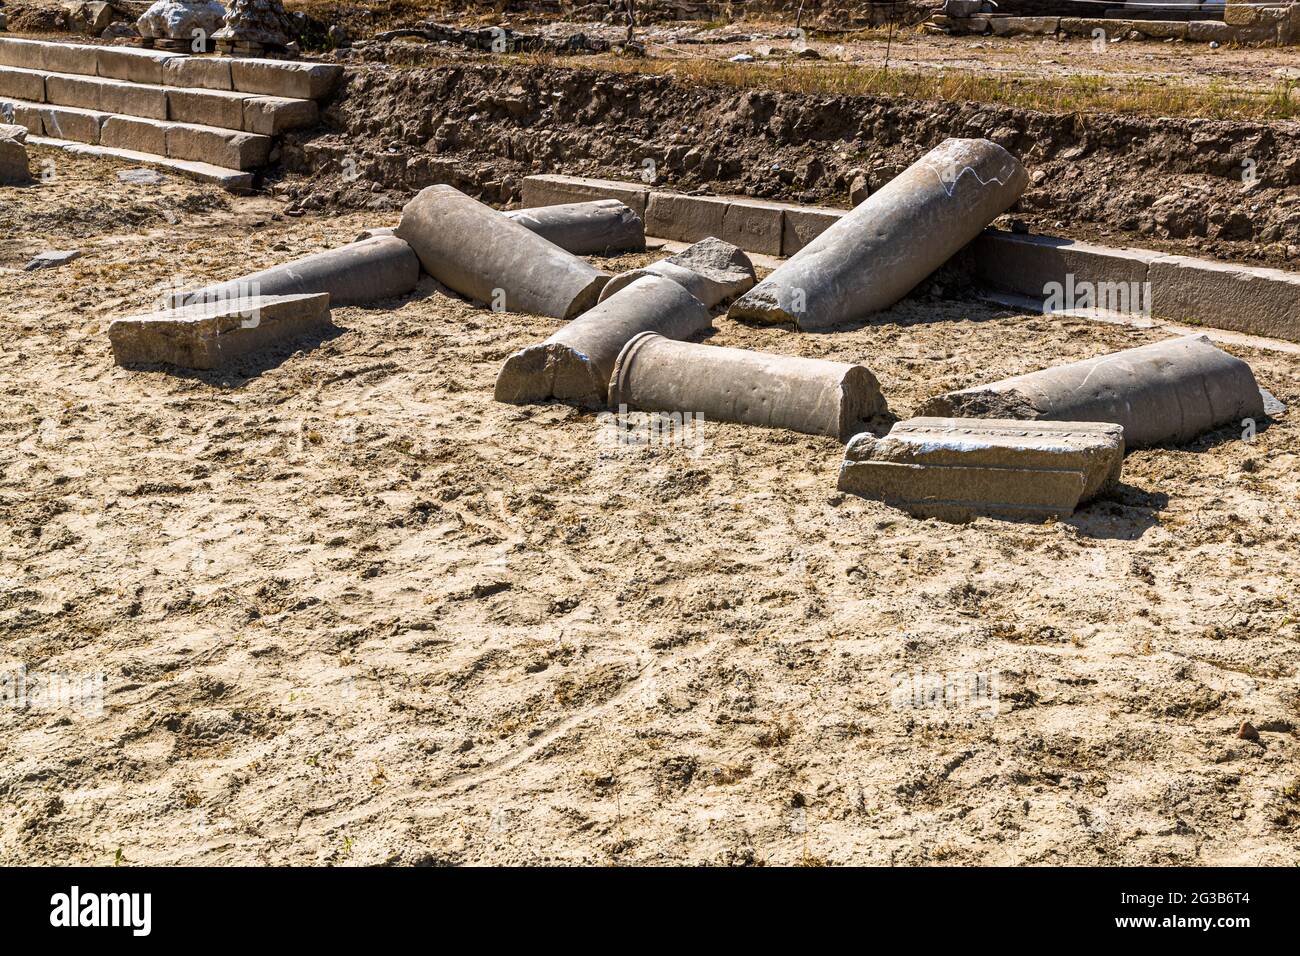 The excavation site of the ancient city of Heraclea Sintica near Petrich, Bulgaria. Heraclea Sintica was founded around 300 BC by Cassander, King of the Kingdom of Macedon (r. 305-297 BC), who also founded Thessaloniki Stock Photo